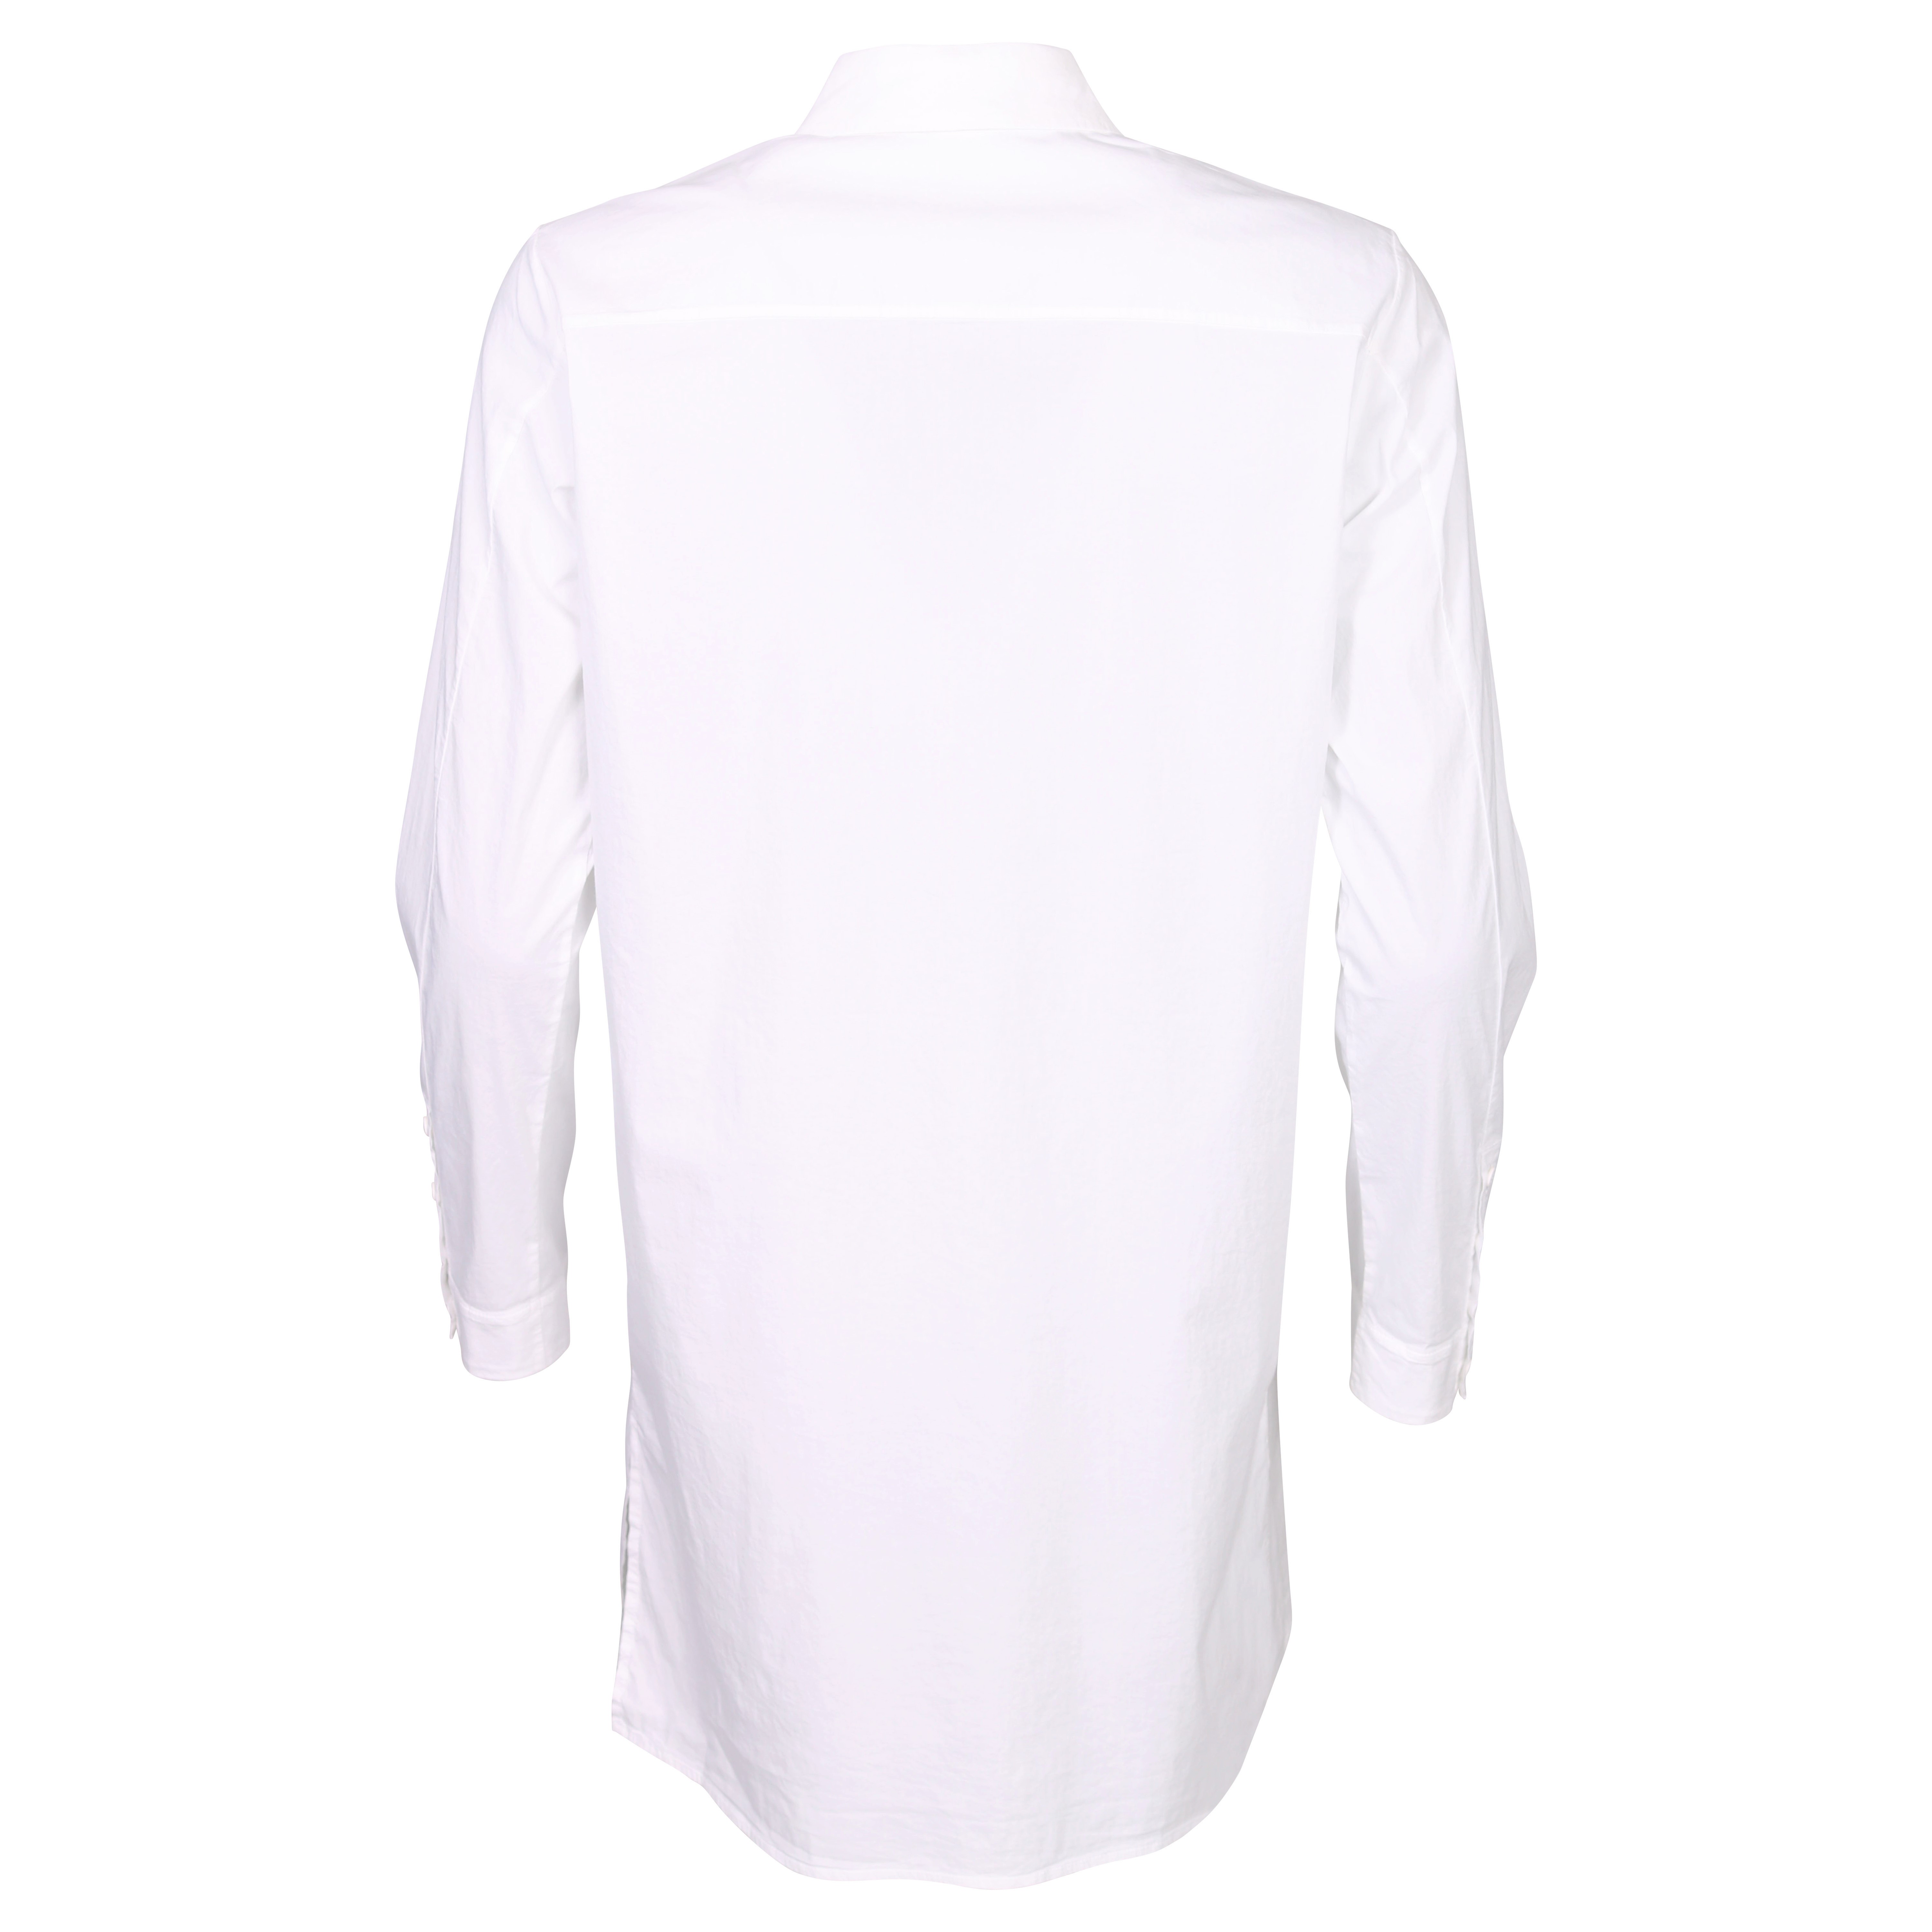 Transit Par Such Blouse in White XS